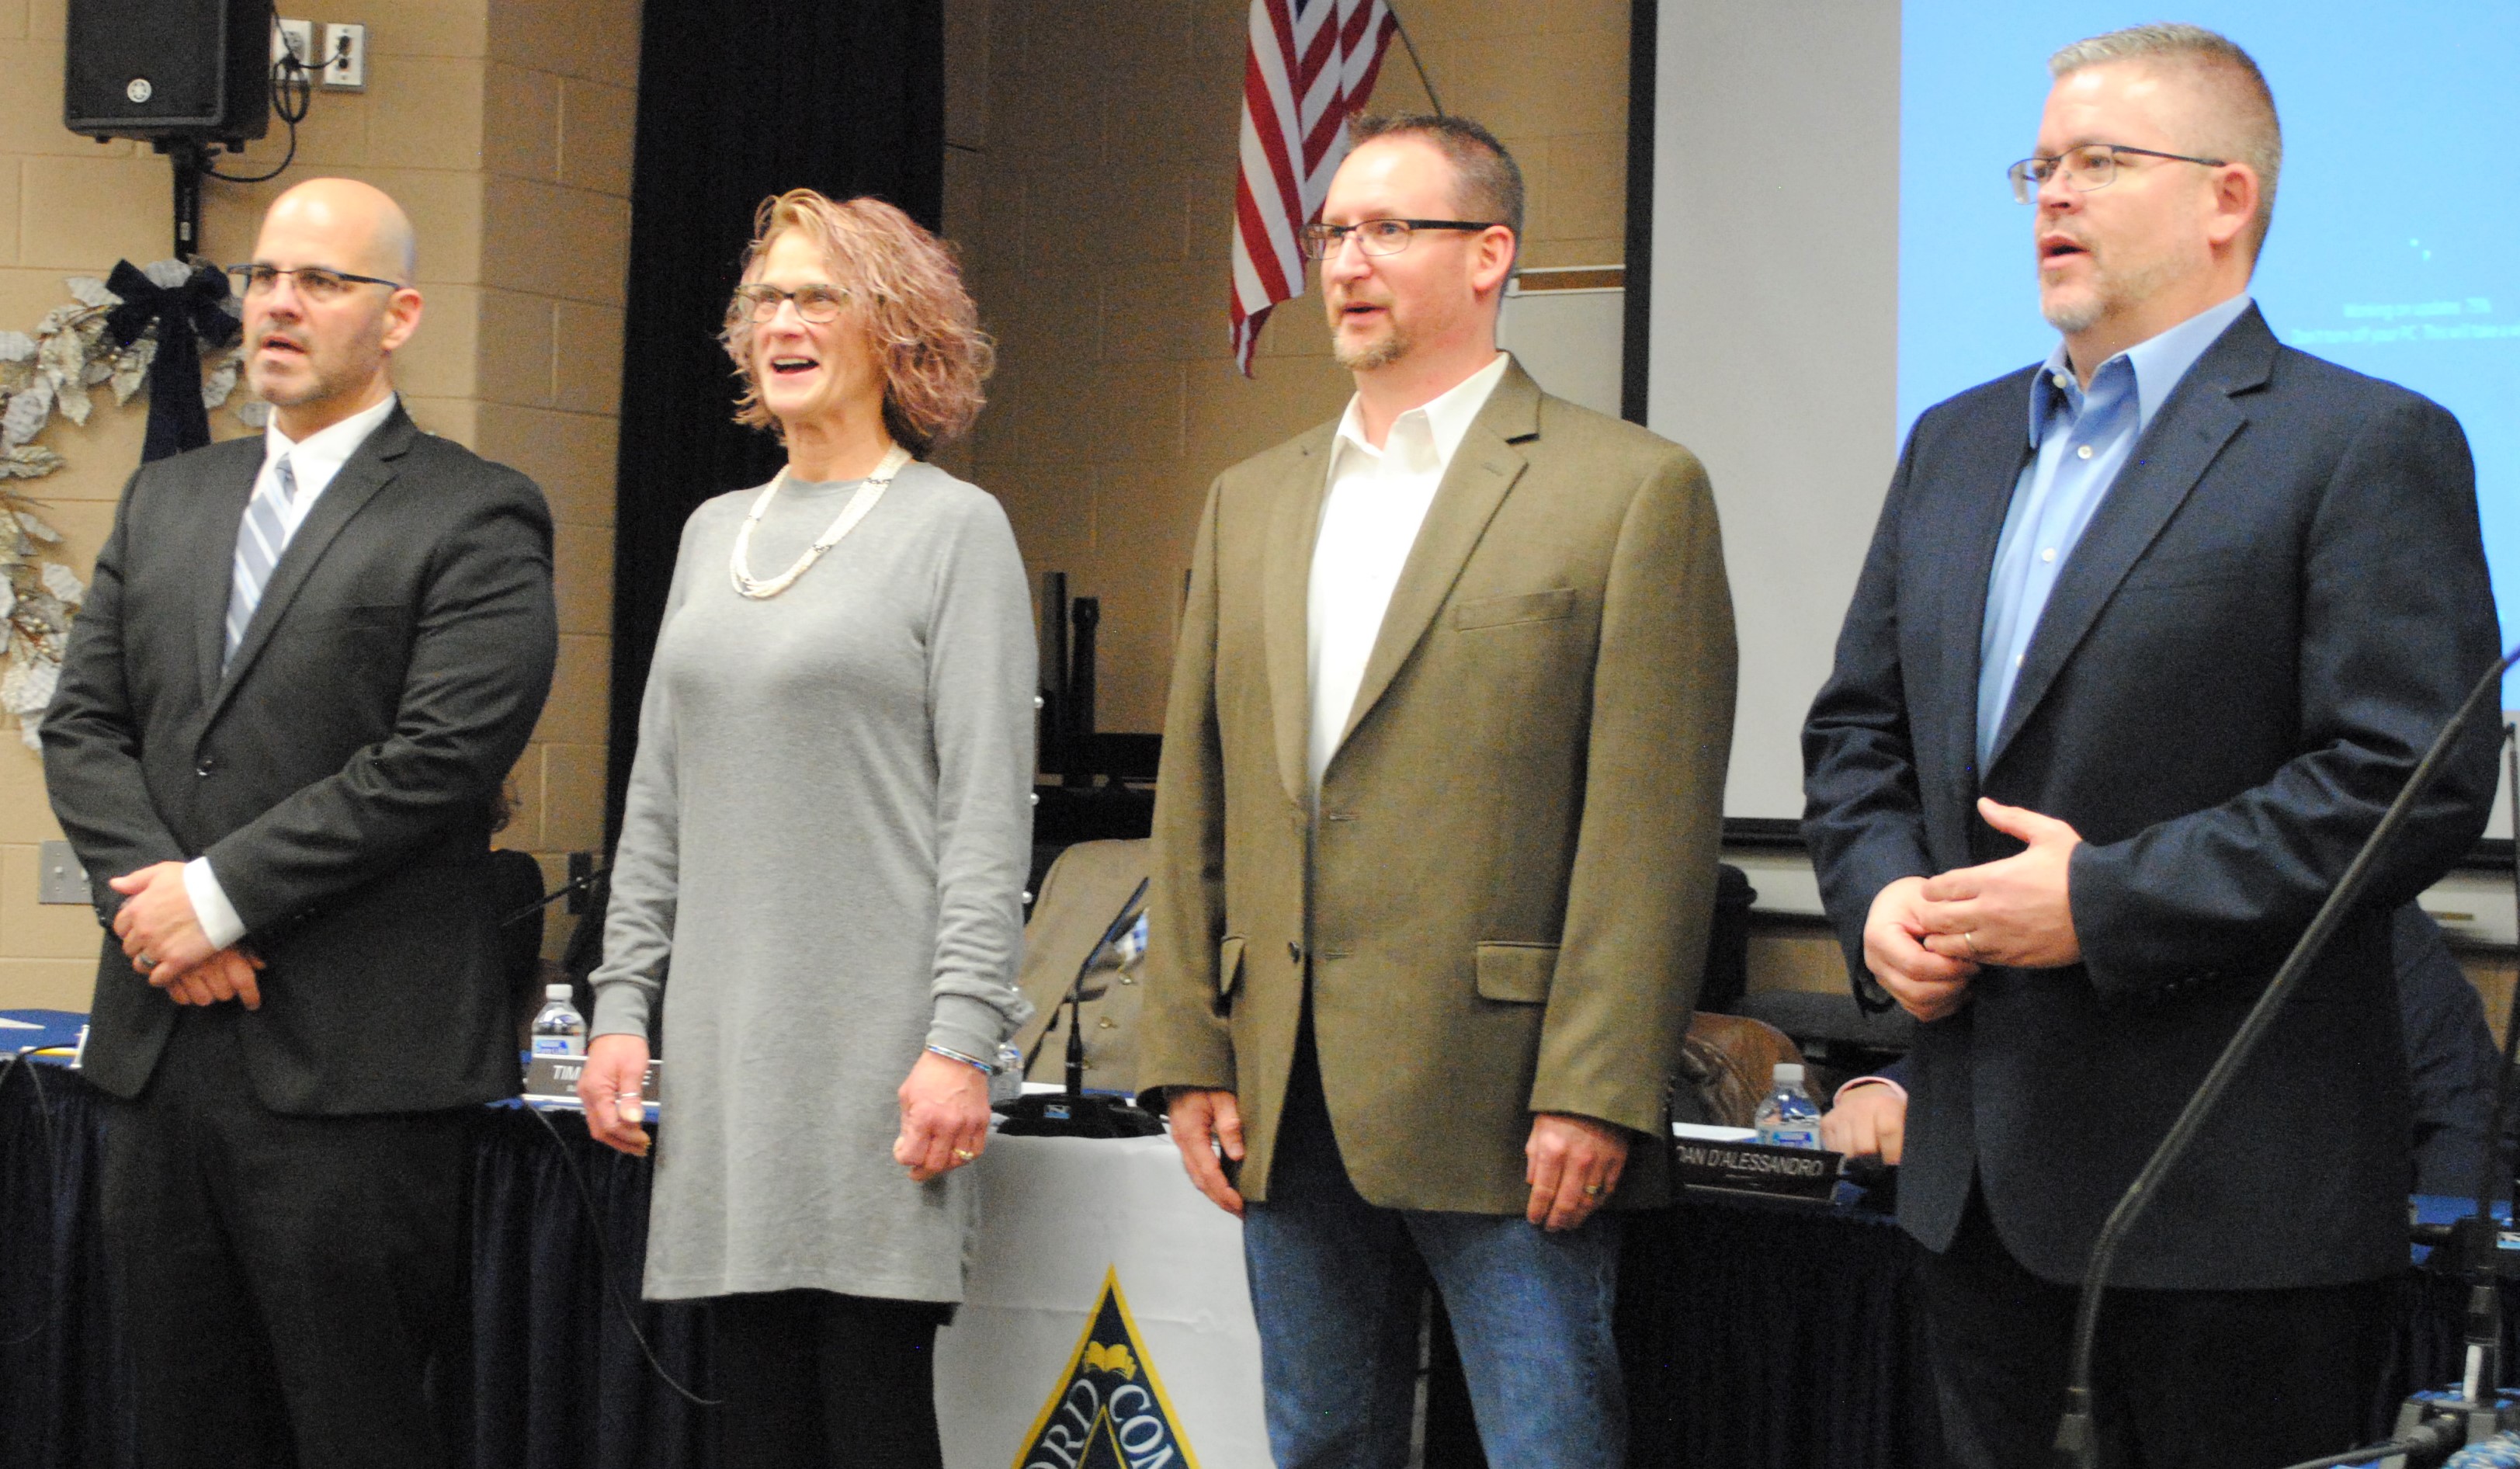 From left, incoming school board trustees Erick Foster, Mary Hanser and Chad Griffith along with Board Treasurer Korey Bailey, a returning trustee, take the oath of office. Photo by Shelby Tankersley.